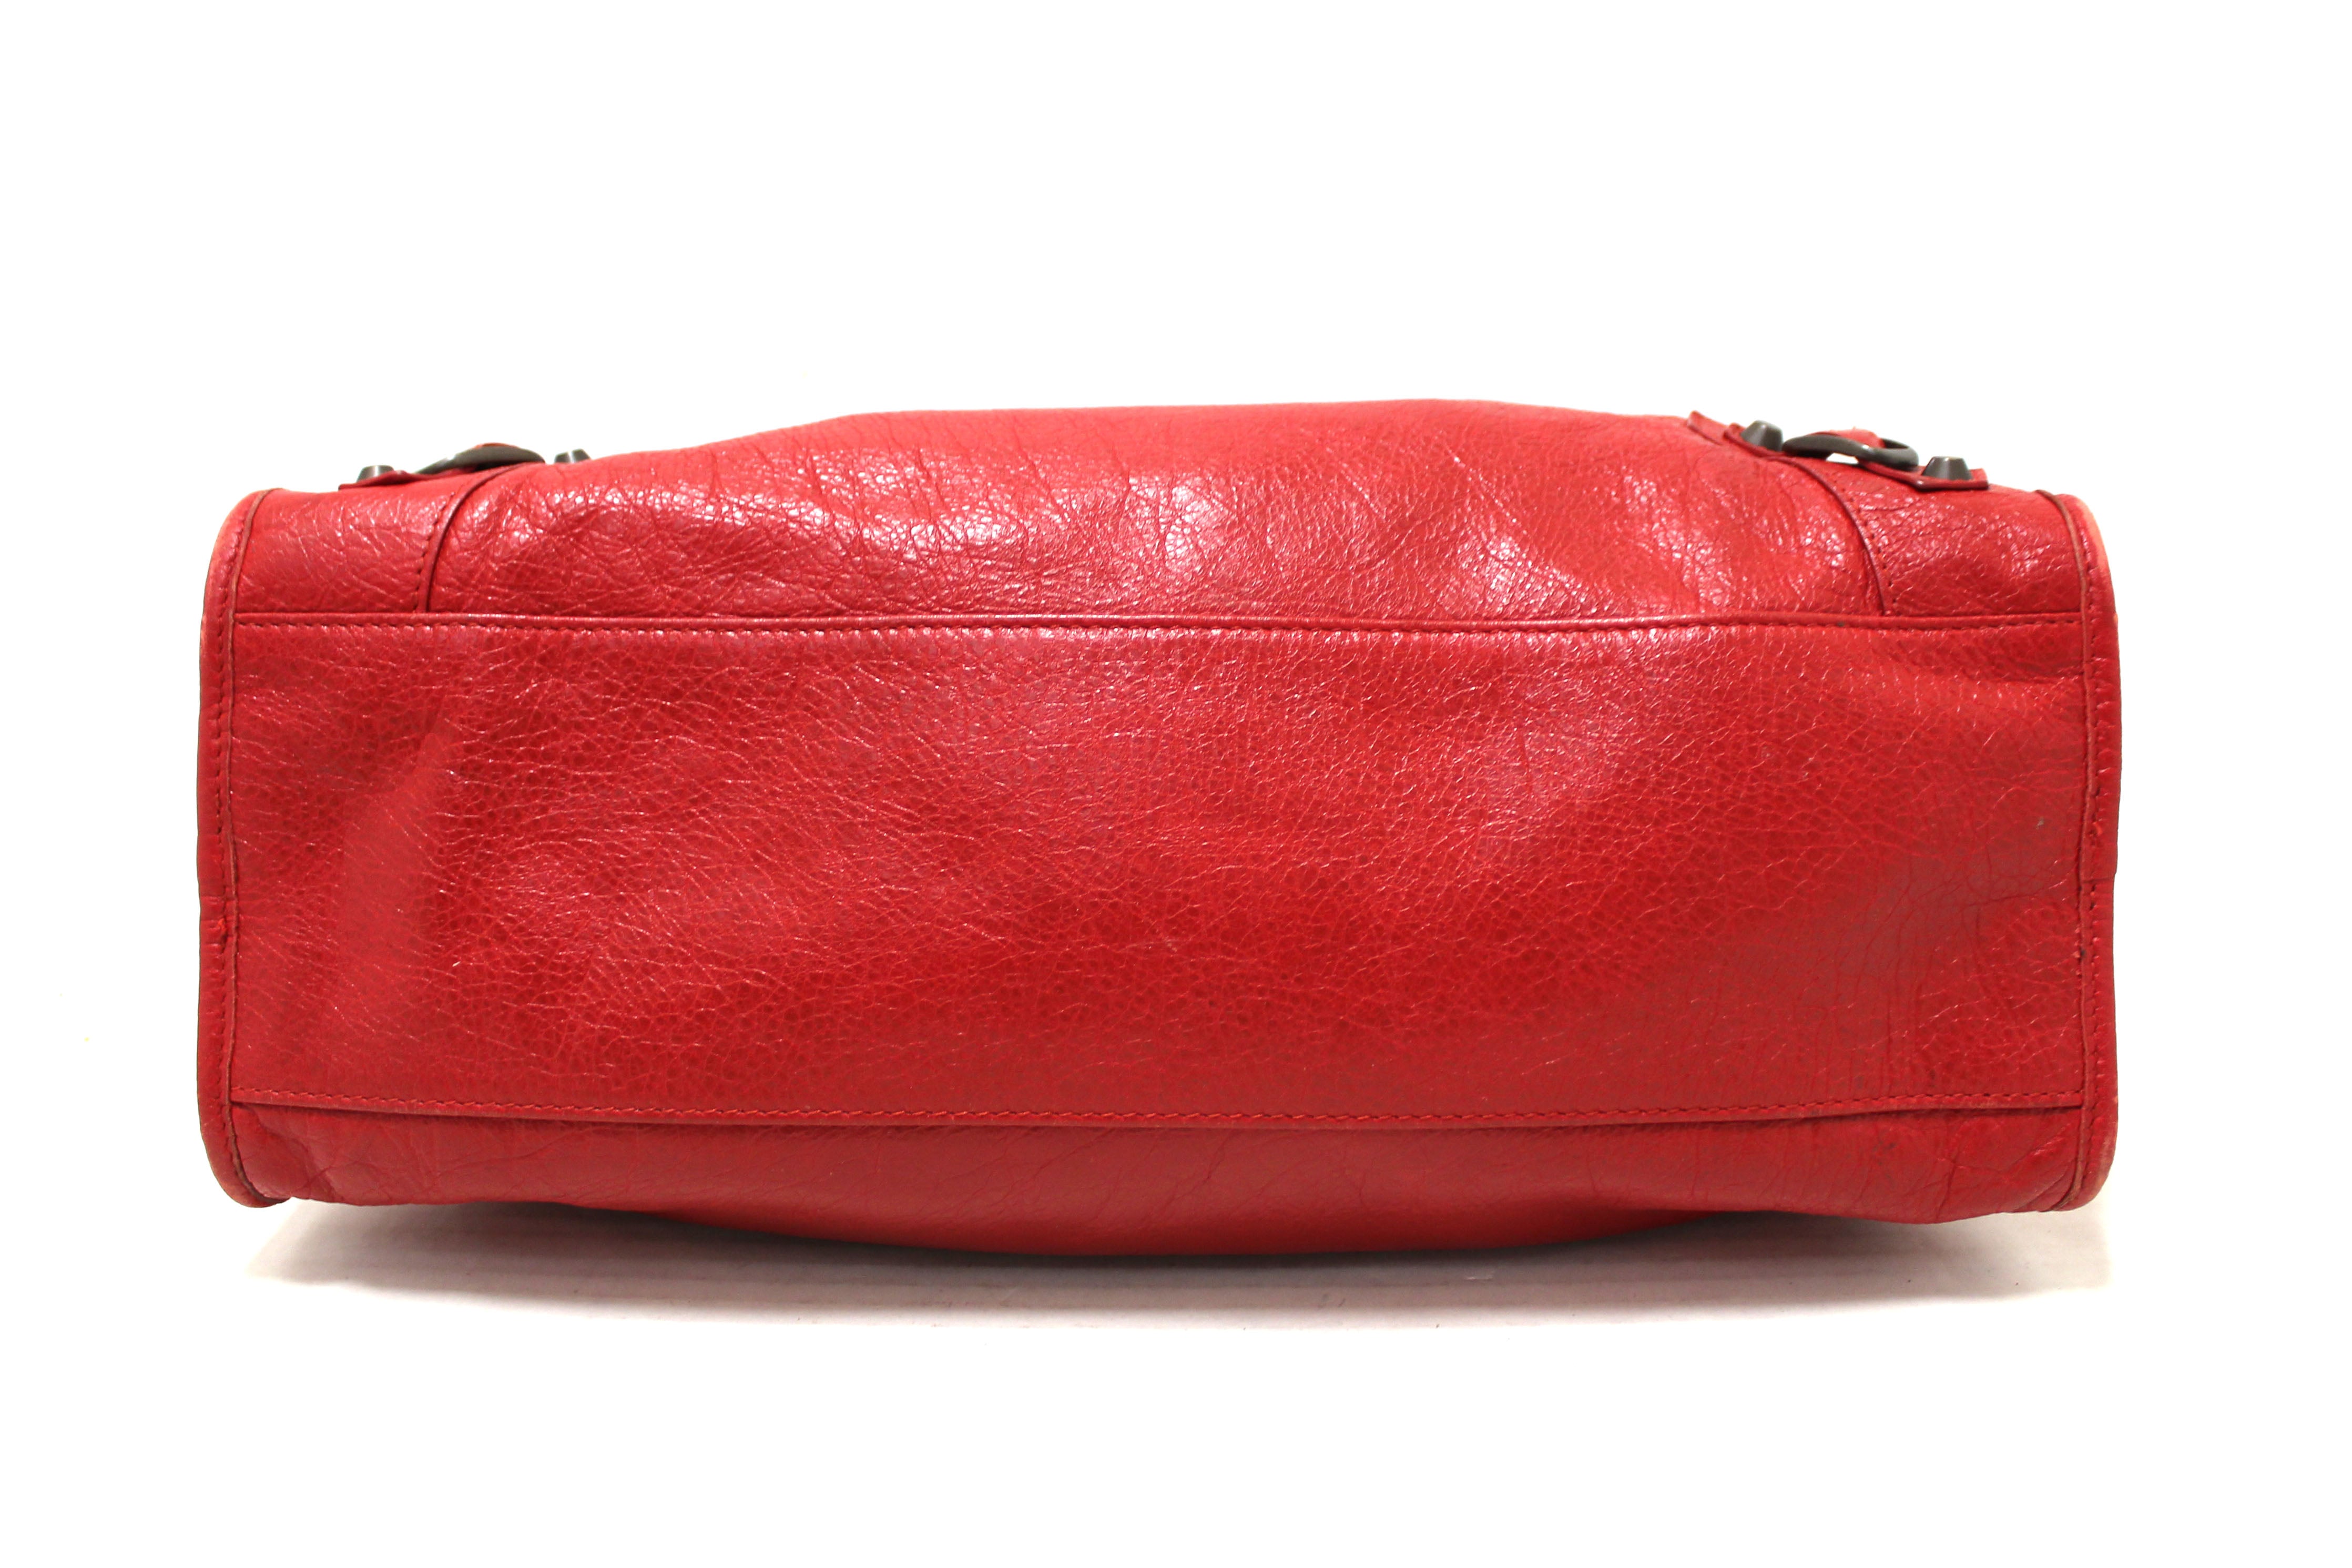 Authentic Balenciaga Red Classic City Lambskin Leather Shoulder Bag